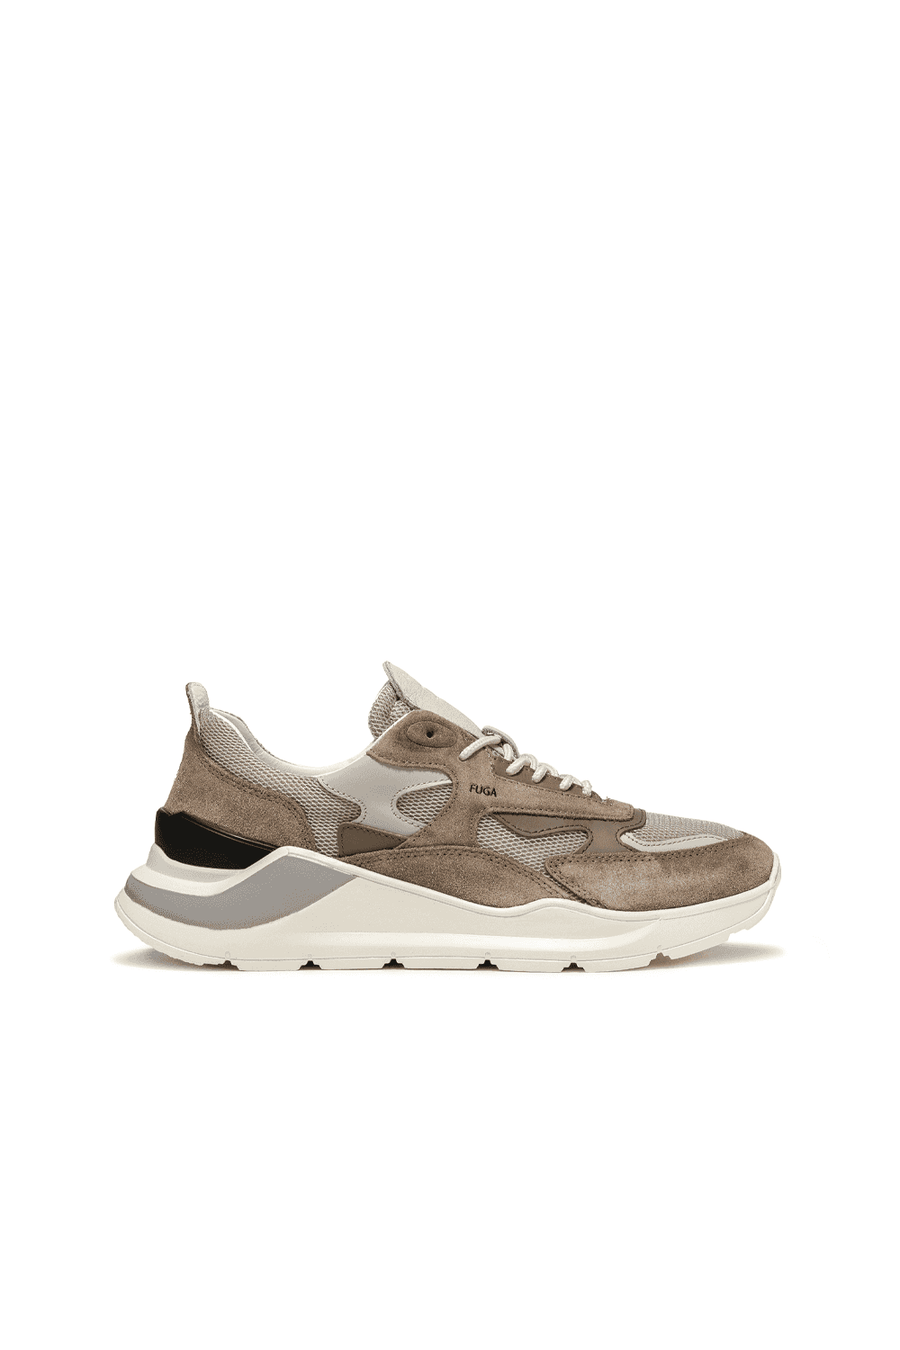 Buy the D.A.T.E. Fuga Mesh Sneaker in Sand at Intro. Spend £50 for free UK delivery. Official stockists. We ship worldwide.